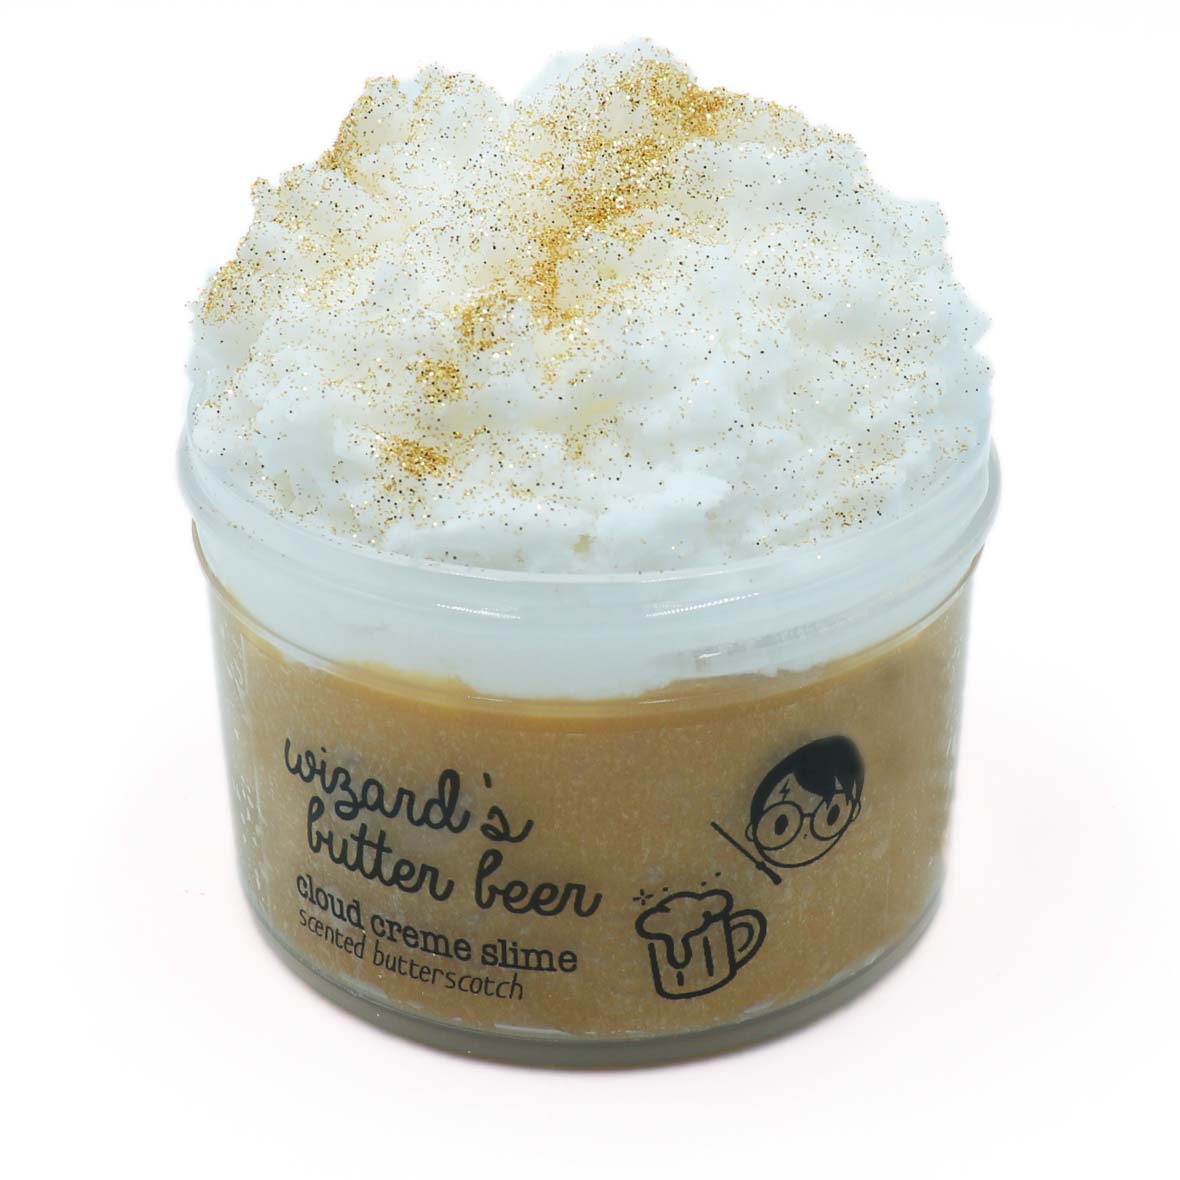 Wizards Harry Potter Butter Beer Brown Glitter Layered Cloud Creme Cream Slime Fantasies Shop 7oz Front View